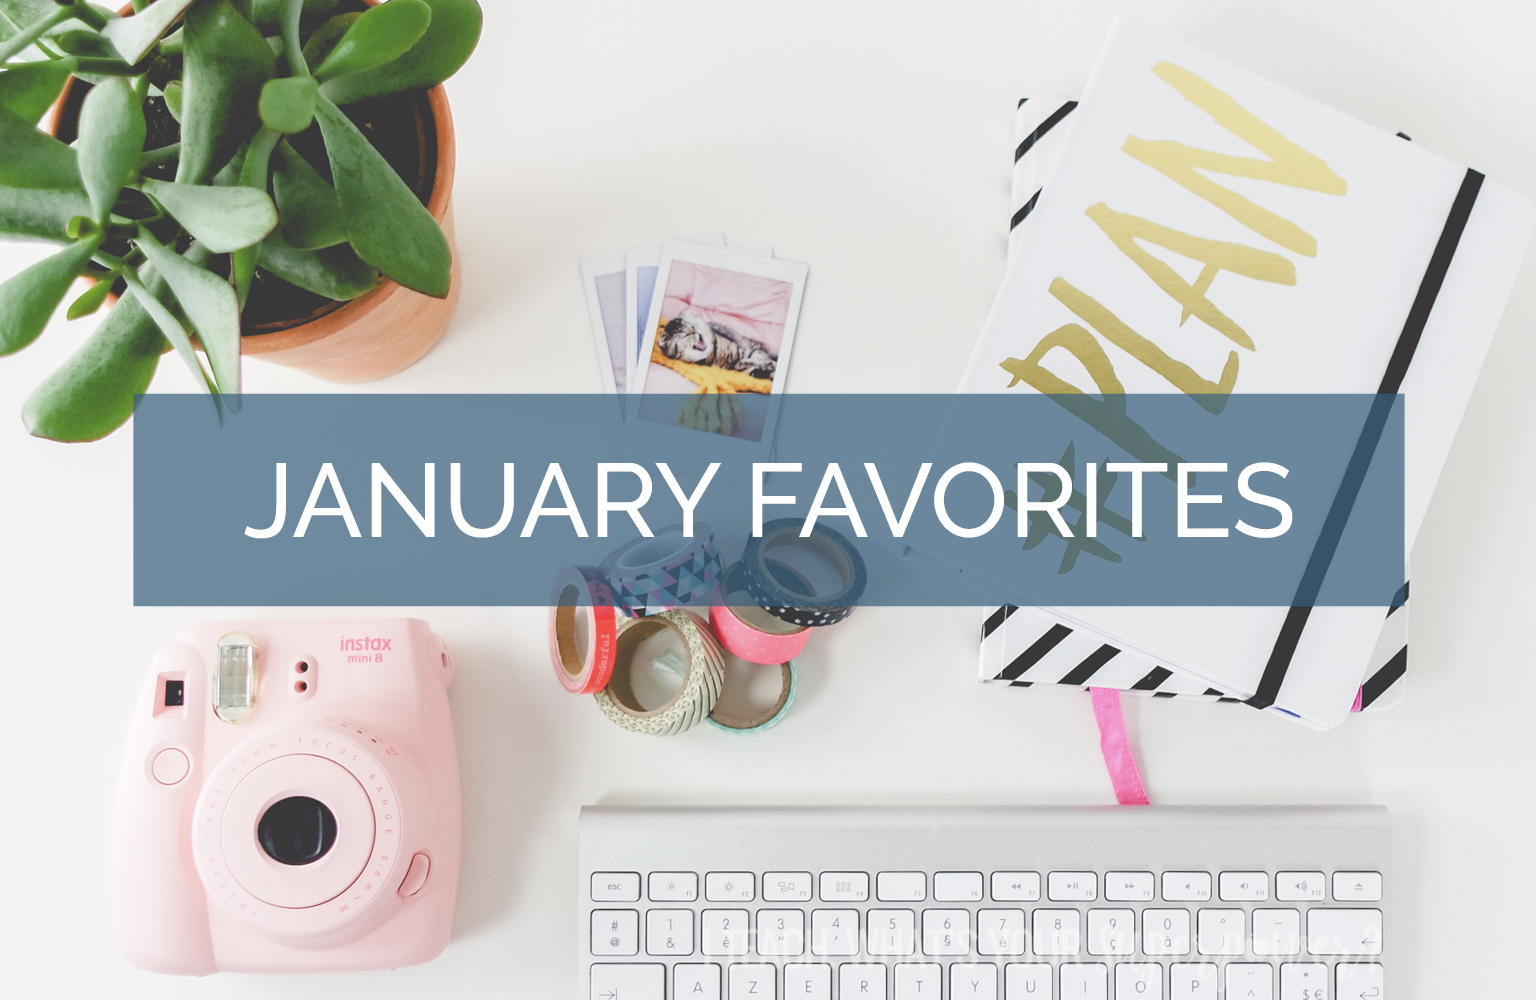 It's time for January favorites! Read about a major get focused time saver, a slightly ridiculous coffee accessory, and more.